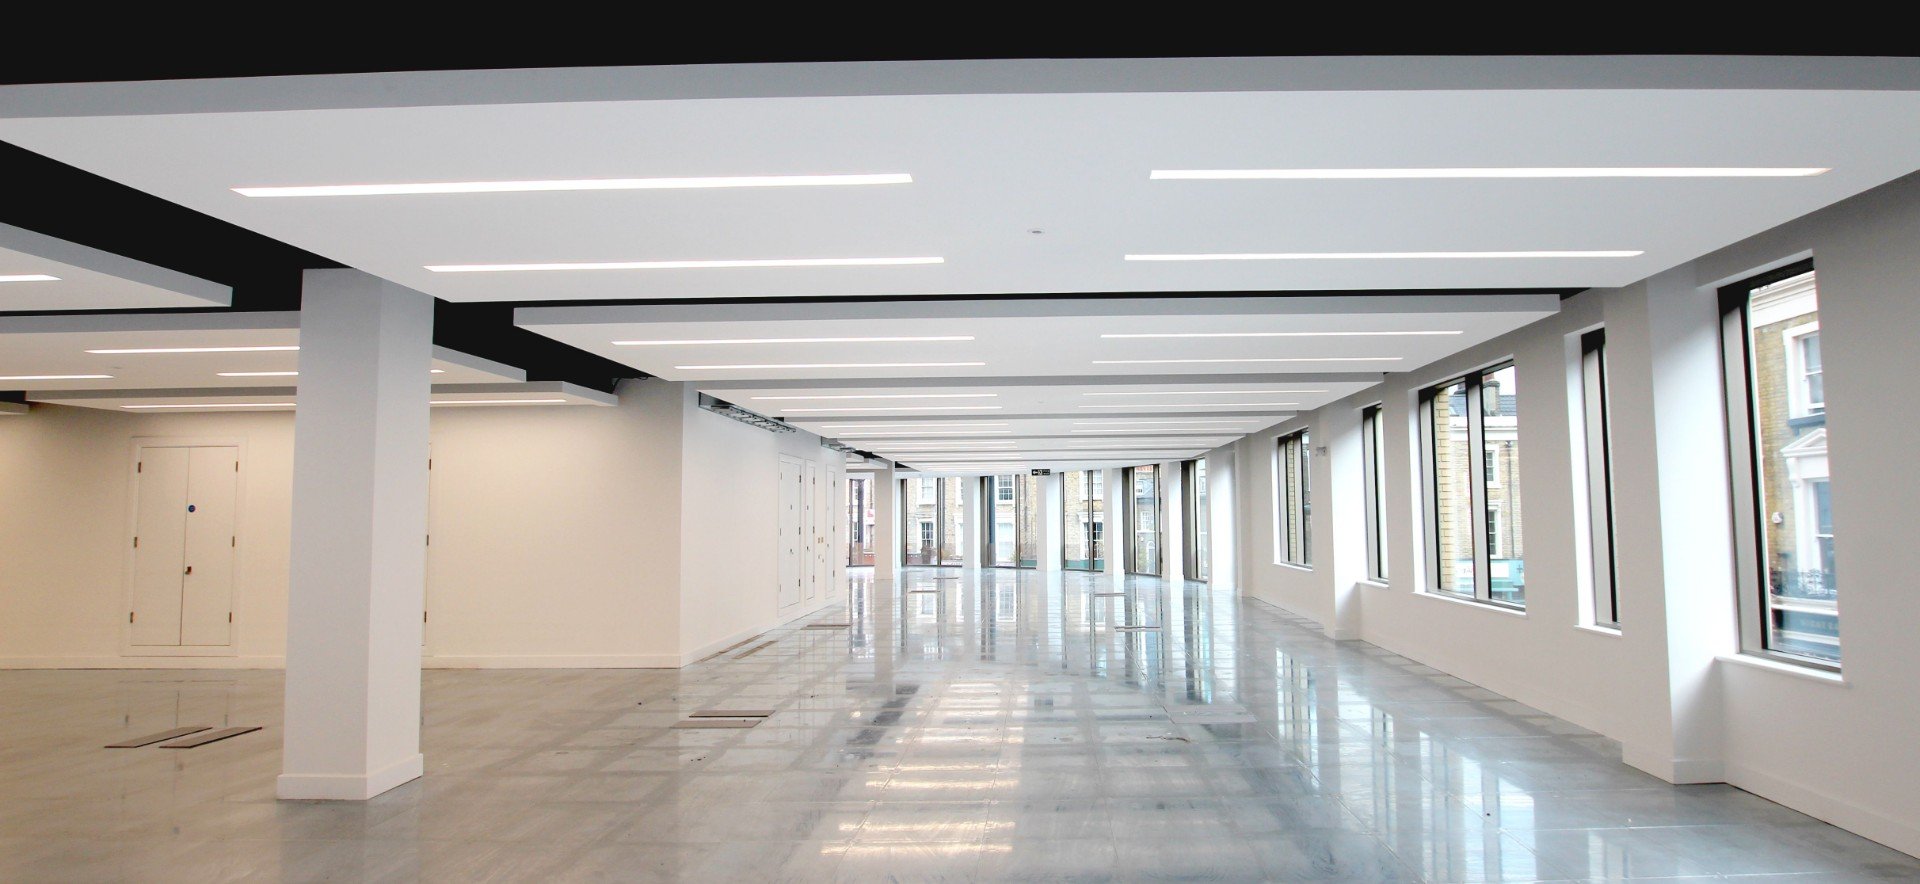 Lighting for a CAT A office refurbishment at Focus Point, London.